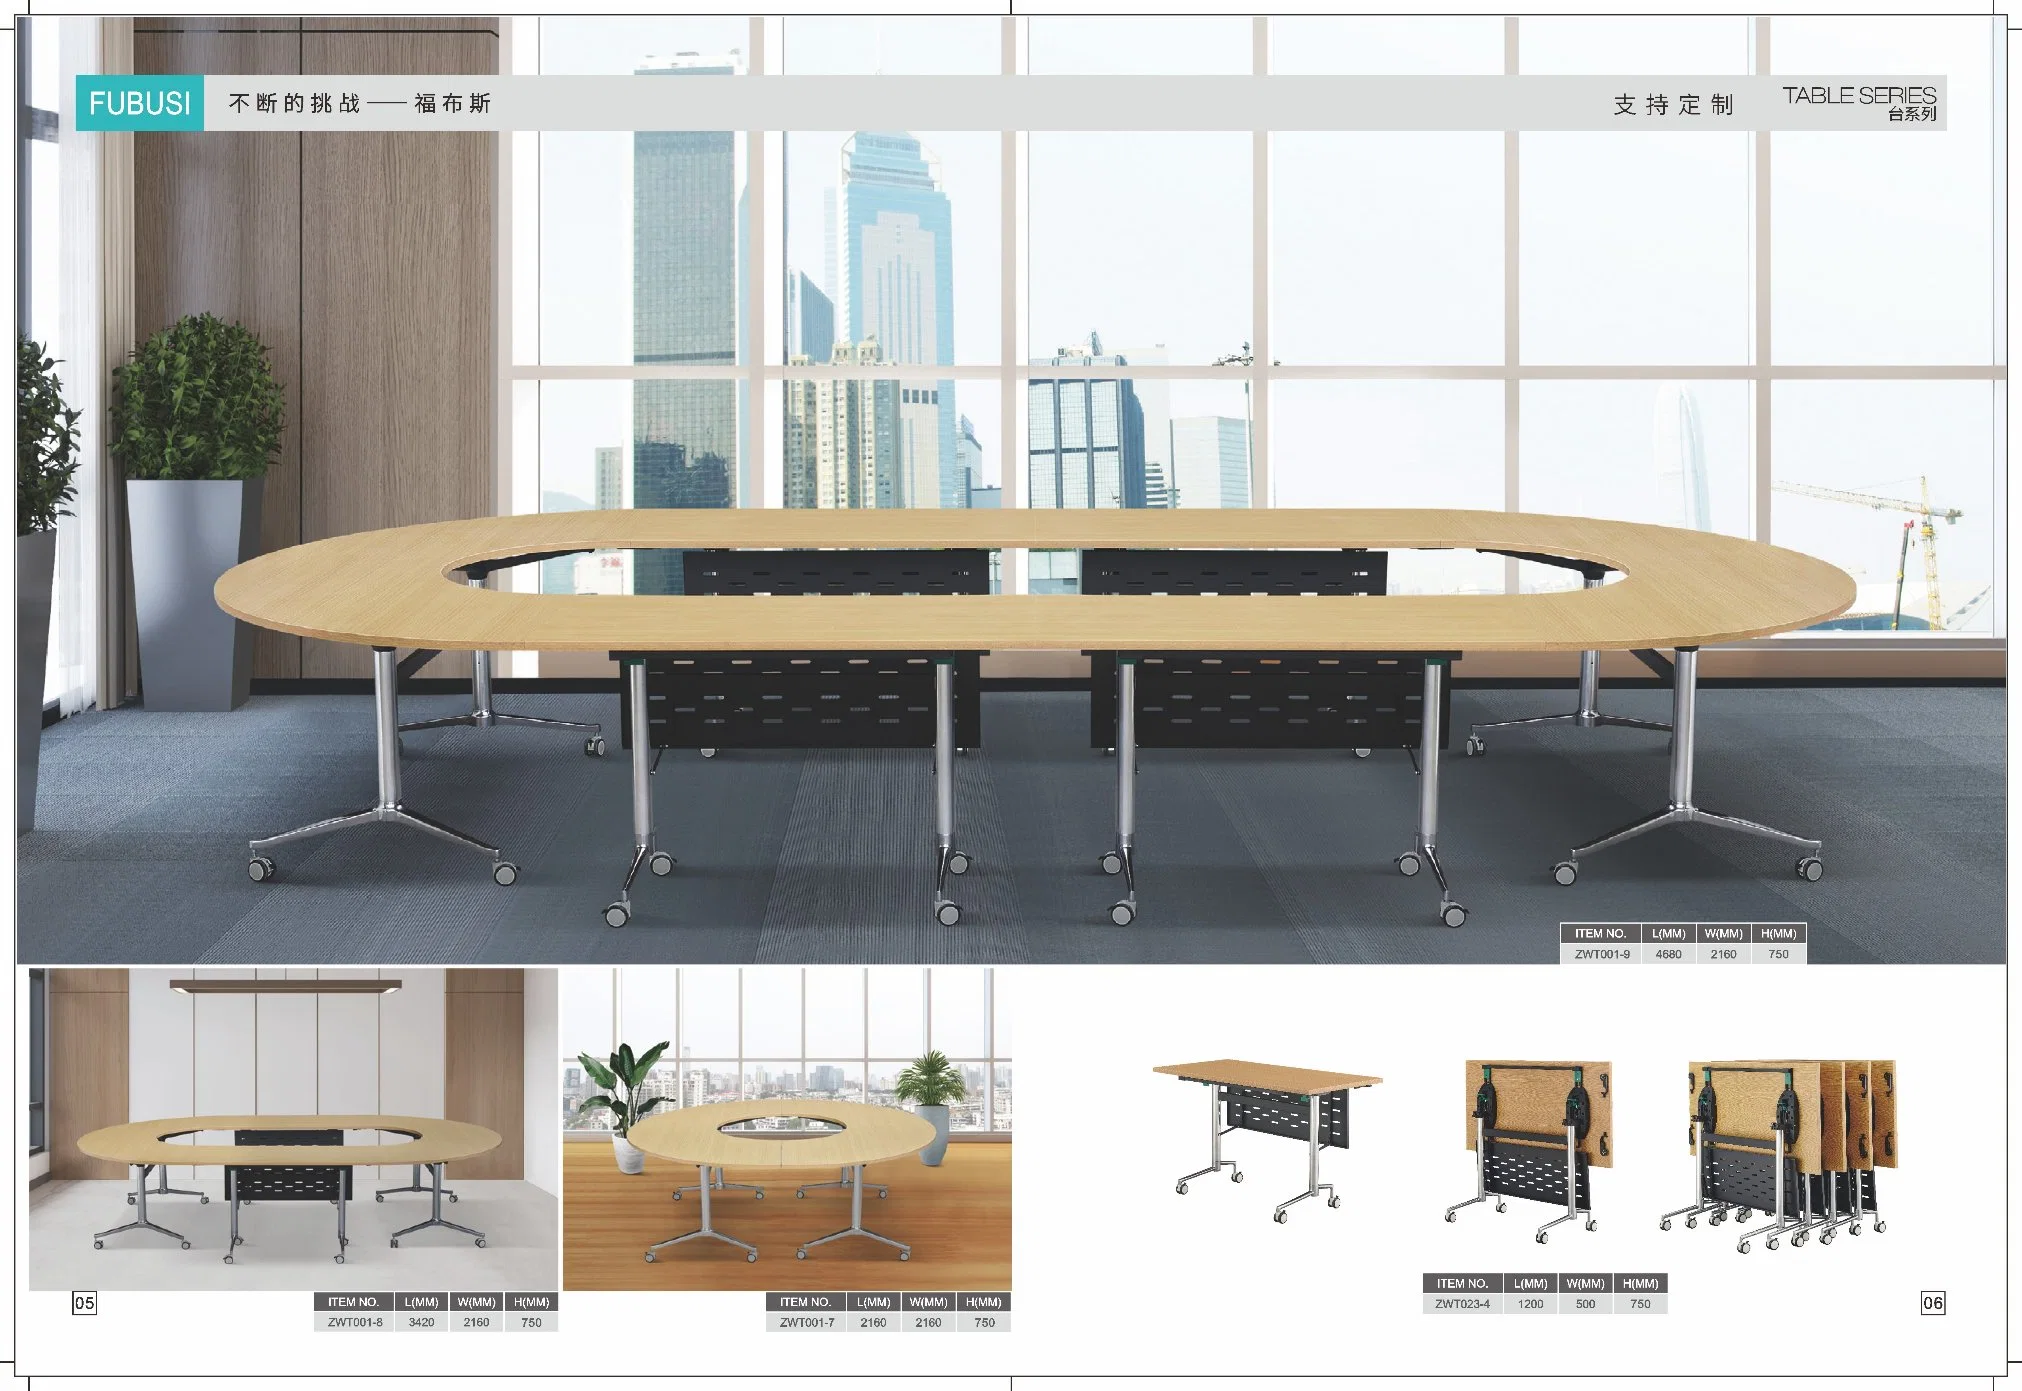 Custom Made Wholesale Meeting Table with Chairs Modern Luxury Smart White Oval Shape Conference Table Office Desk